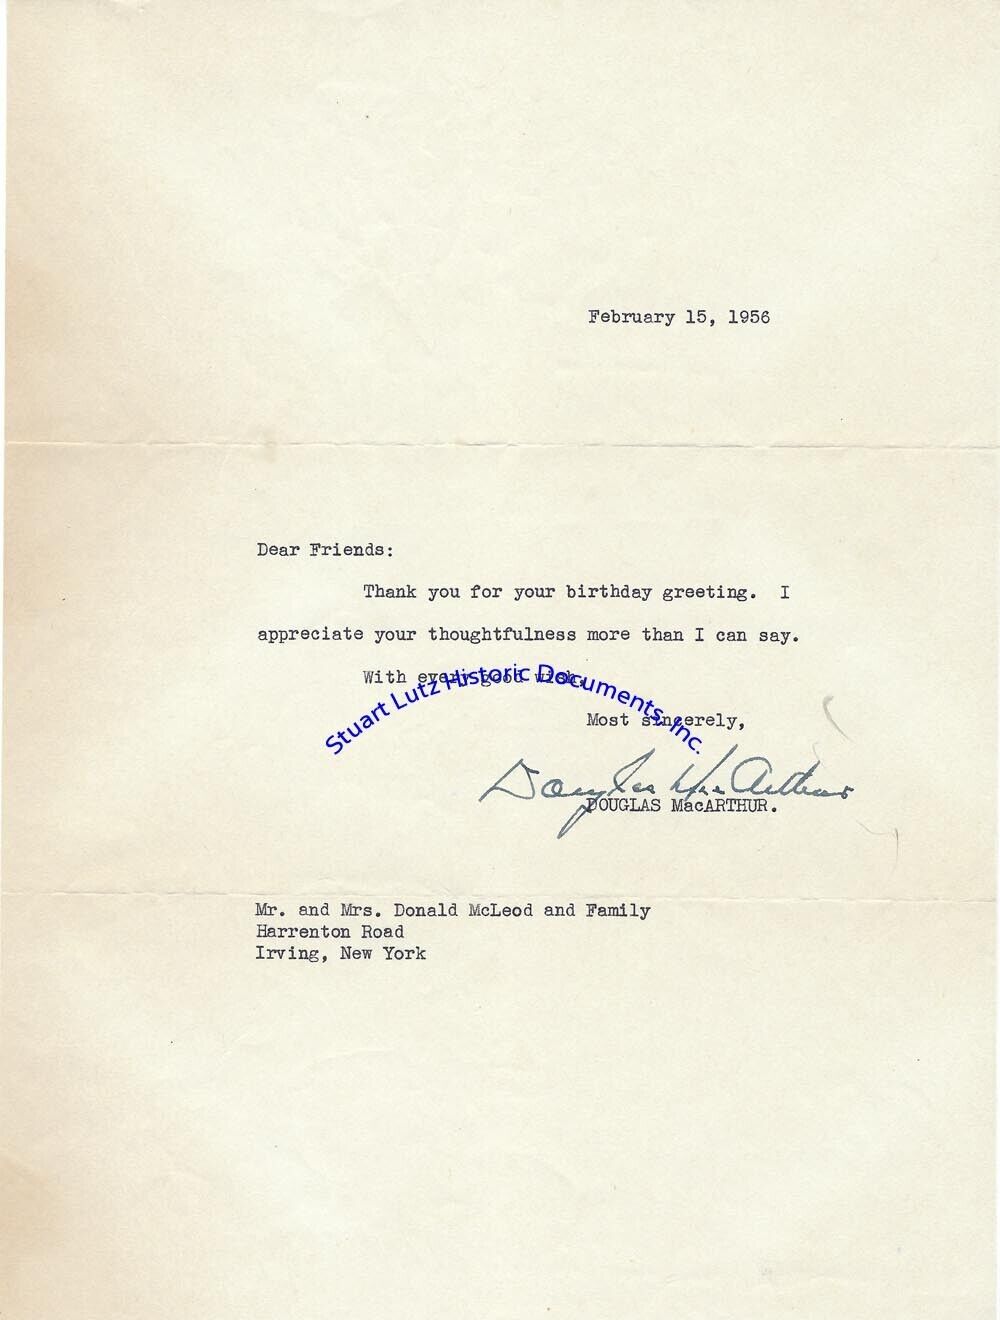 Douglas MacArthur signed letter 1958 - thanks for the birthday wishes